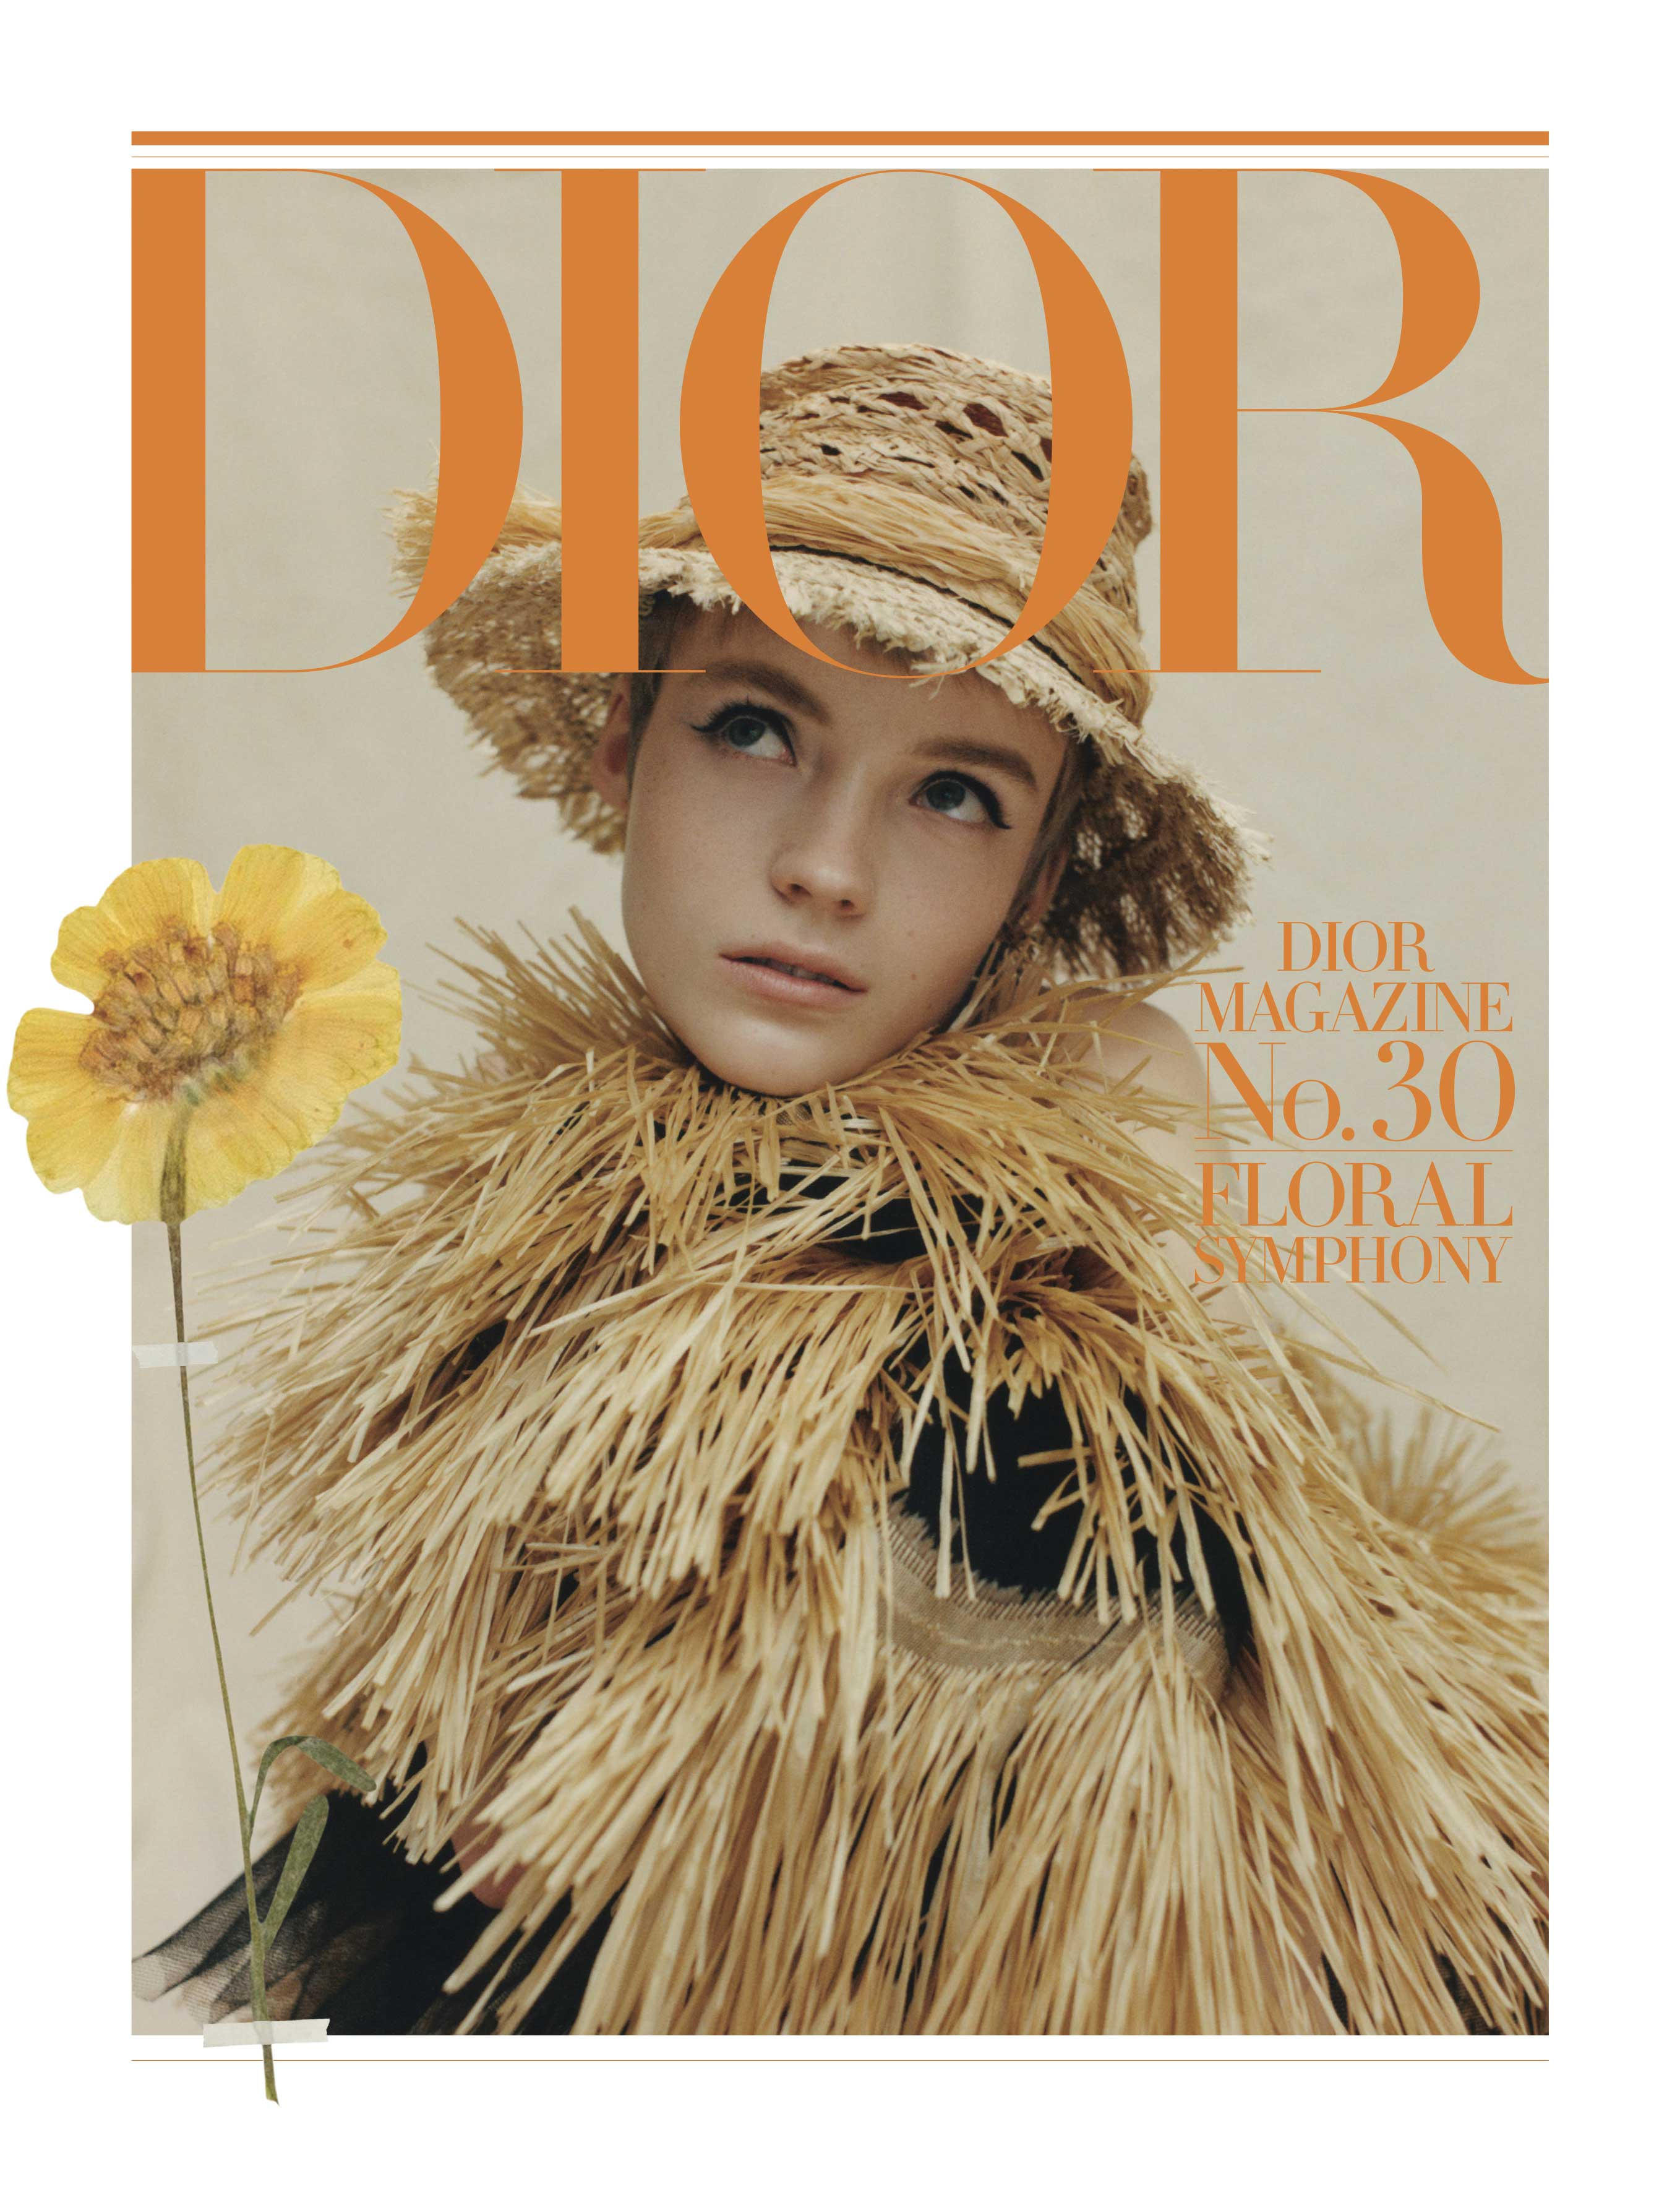 DiorMag30_HD_COUVERTURE.jpg